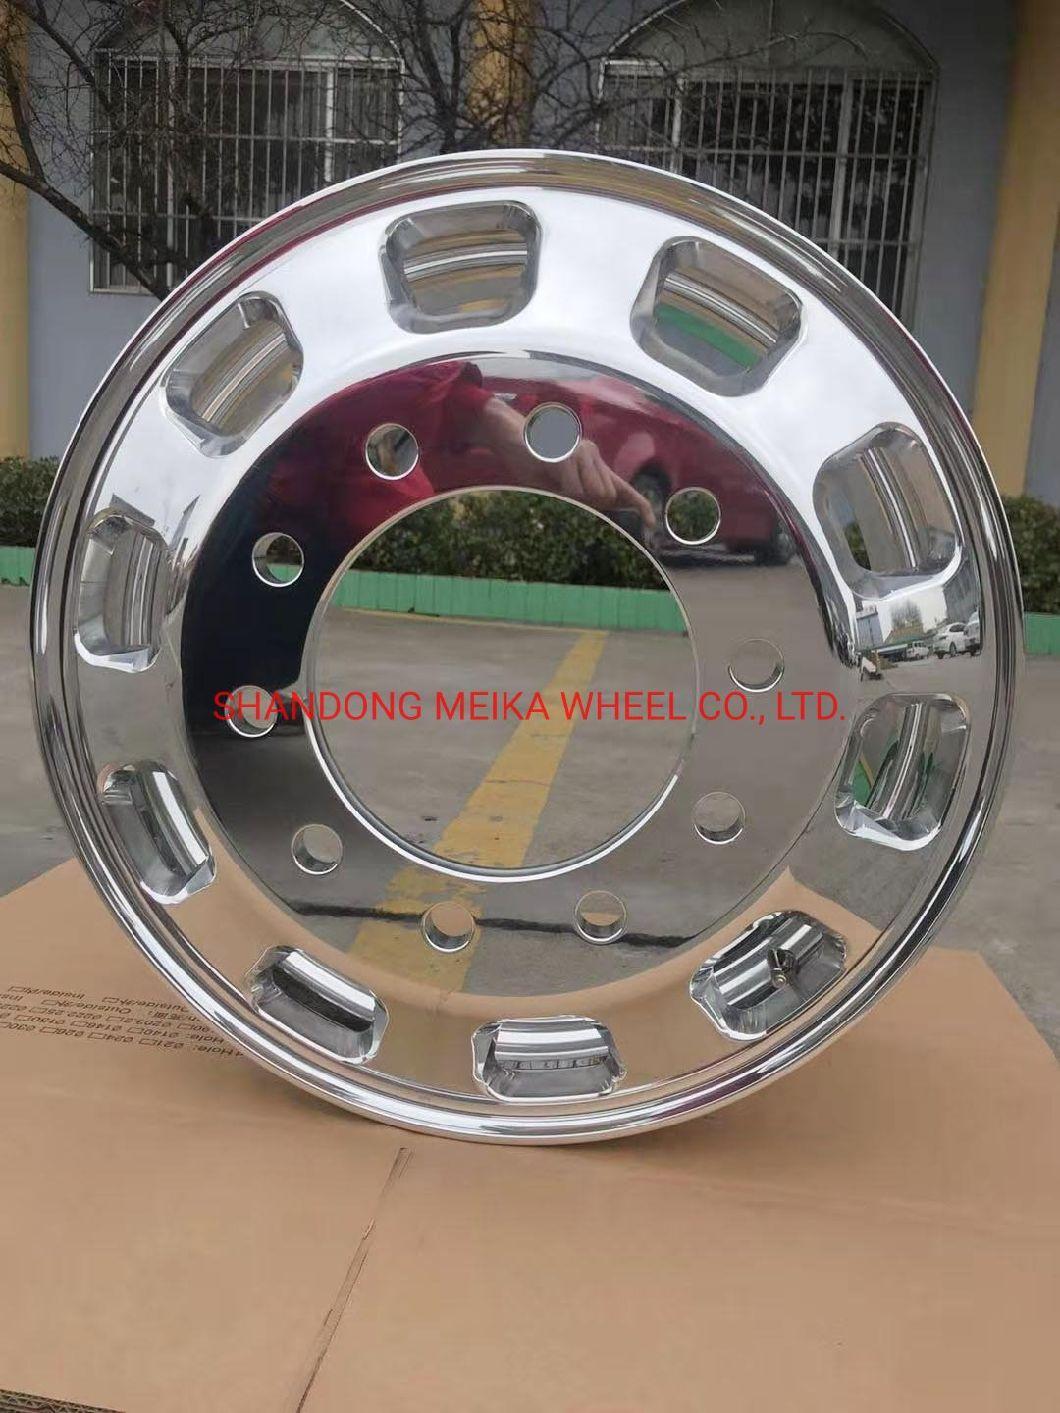 22.5 X 8.25 Super Quality of Forged Alloy Truck Wheels